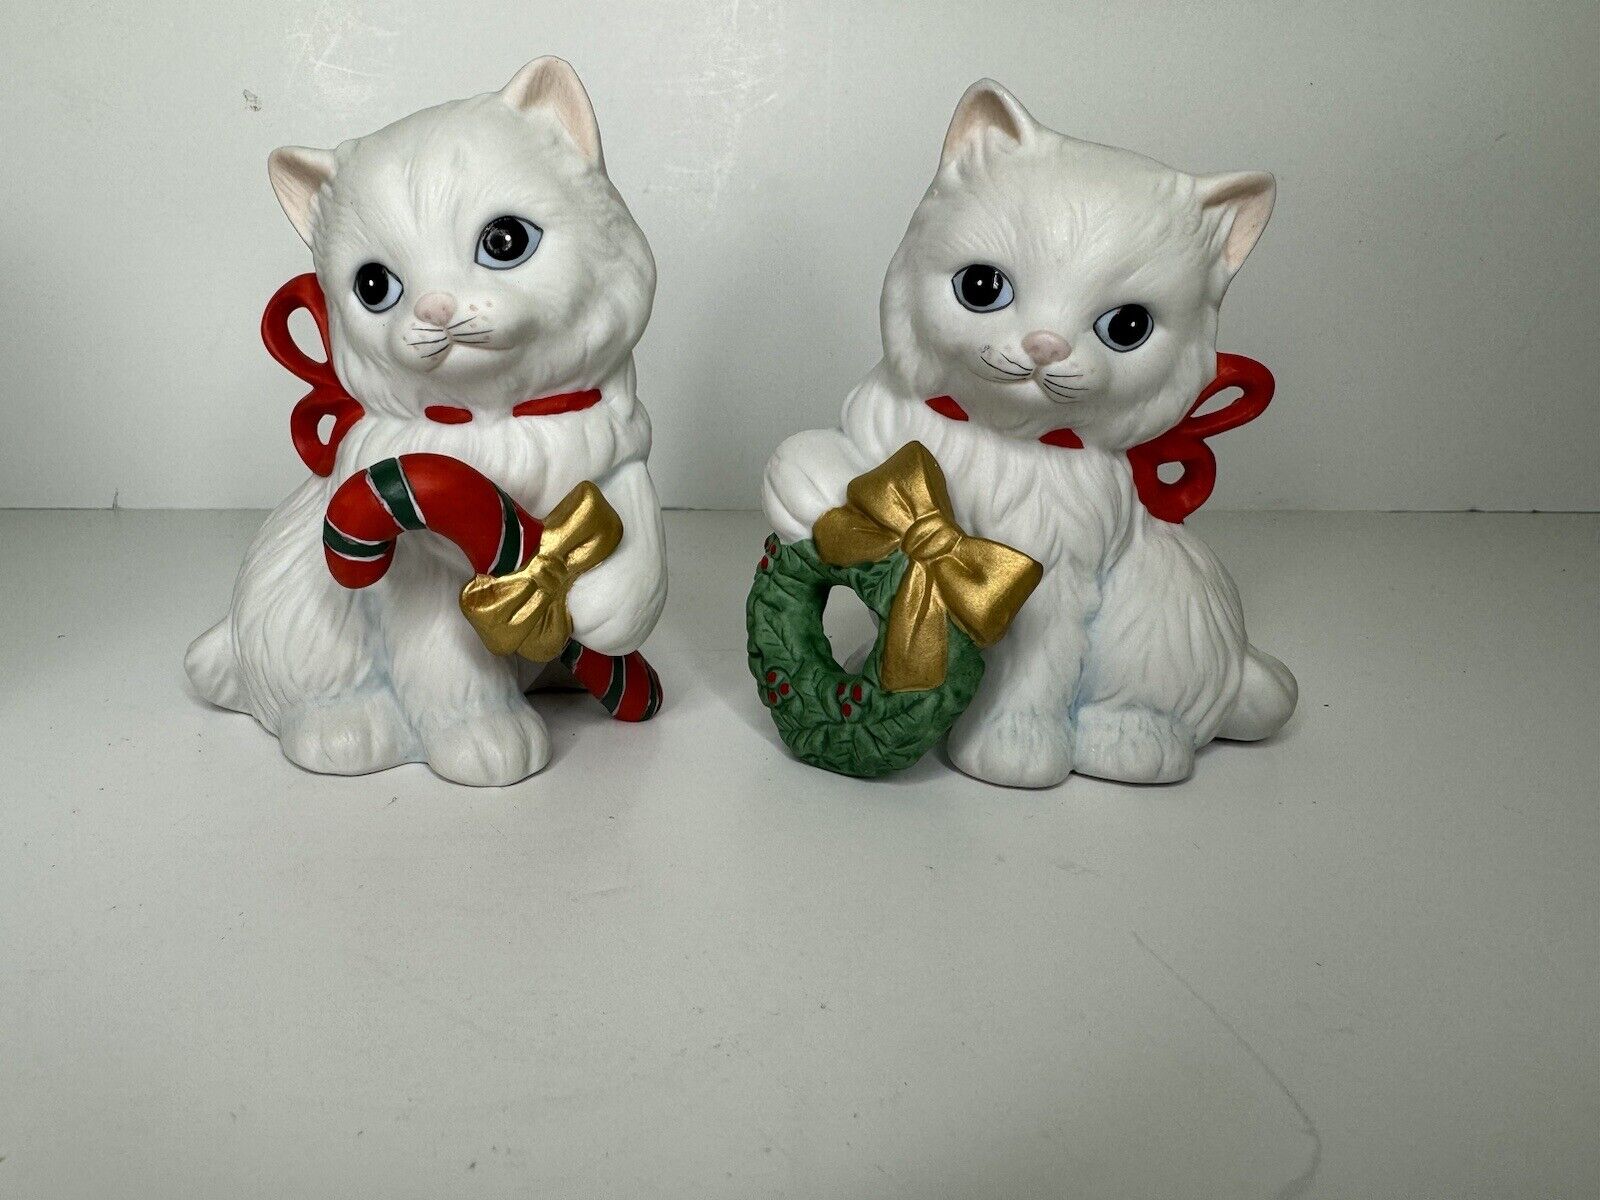 2 Vintage Homco White Cat Kitten Kitty Figurines Christmas Wreath Candy Cane 80s